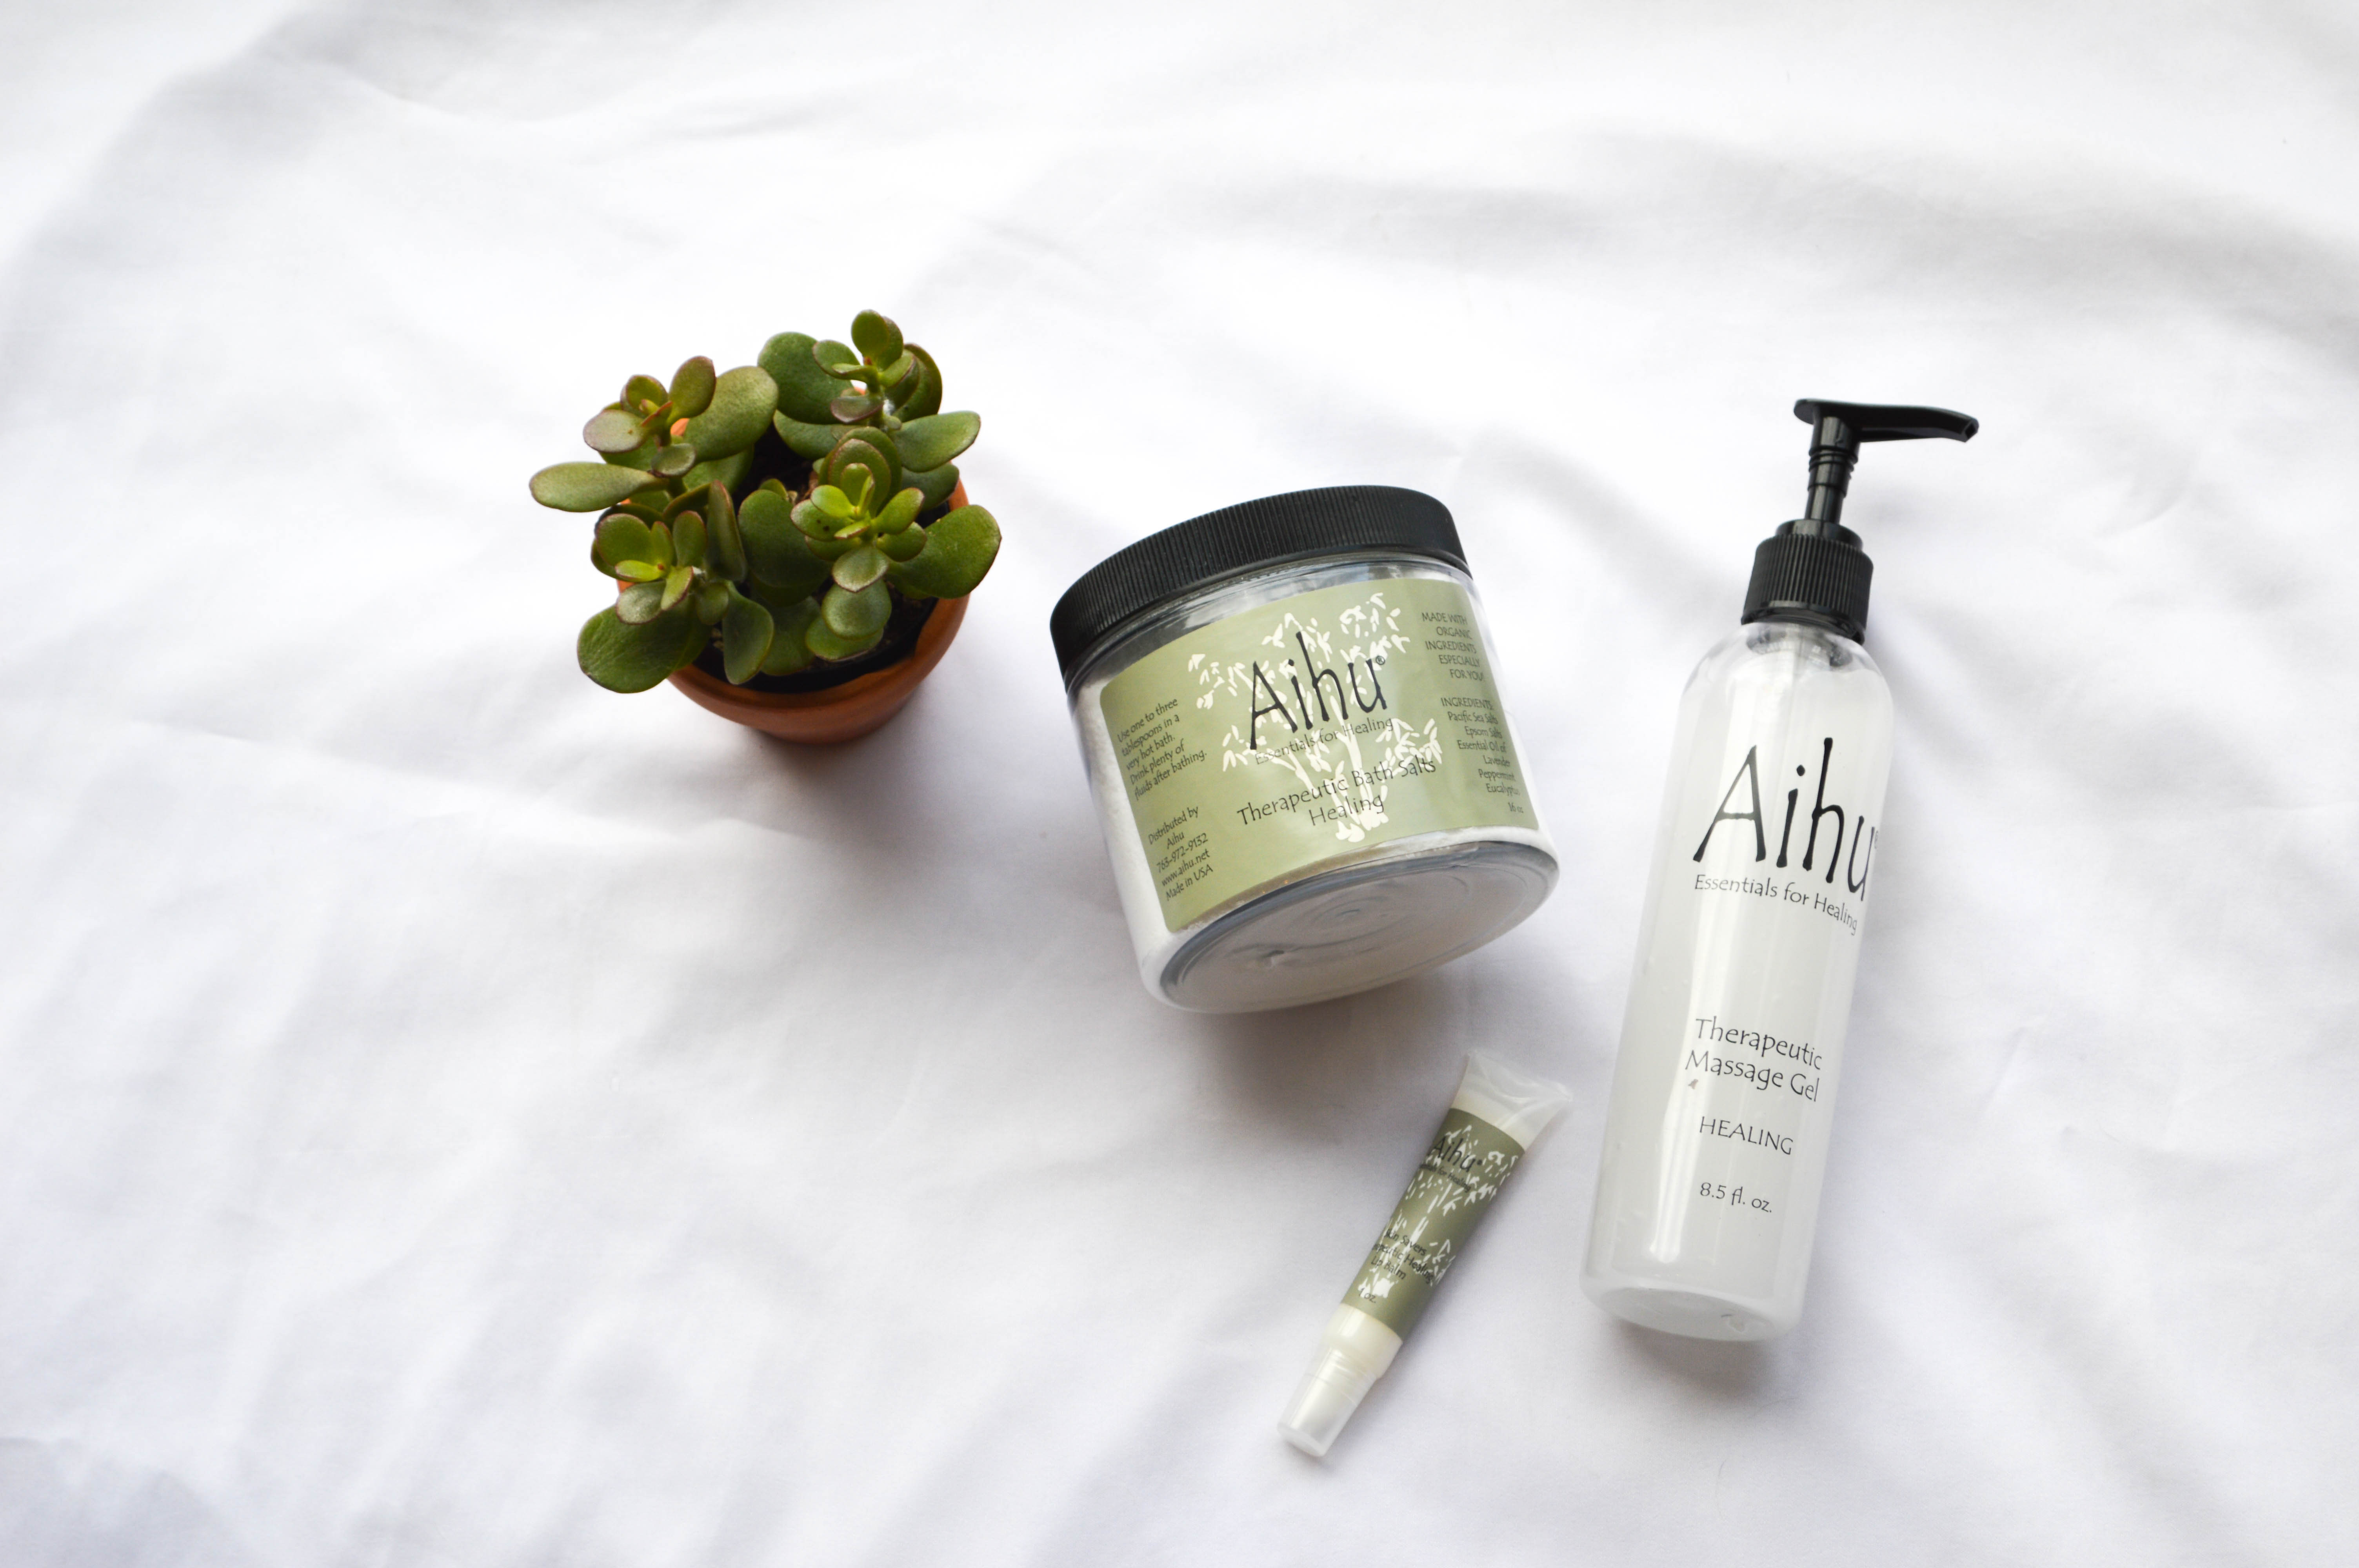 Aihu Essentials for Healing review featured by popular Denver life and style blogger, All Things Lovely